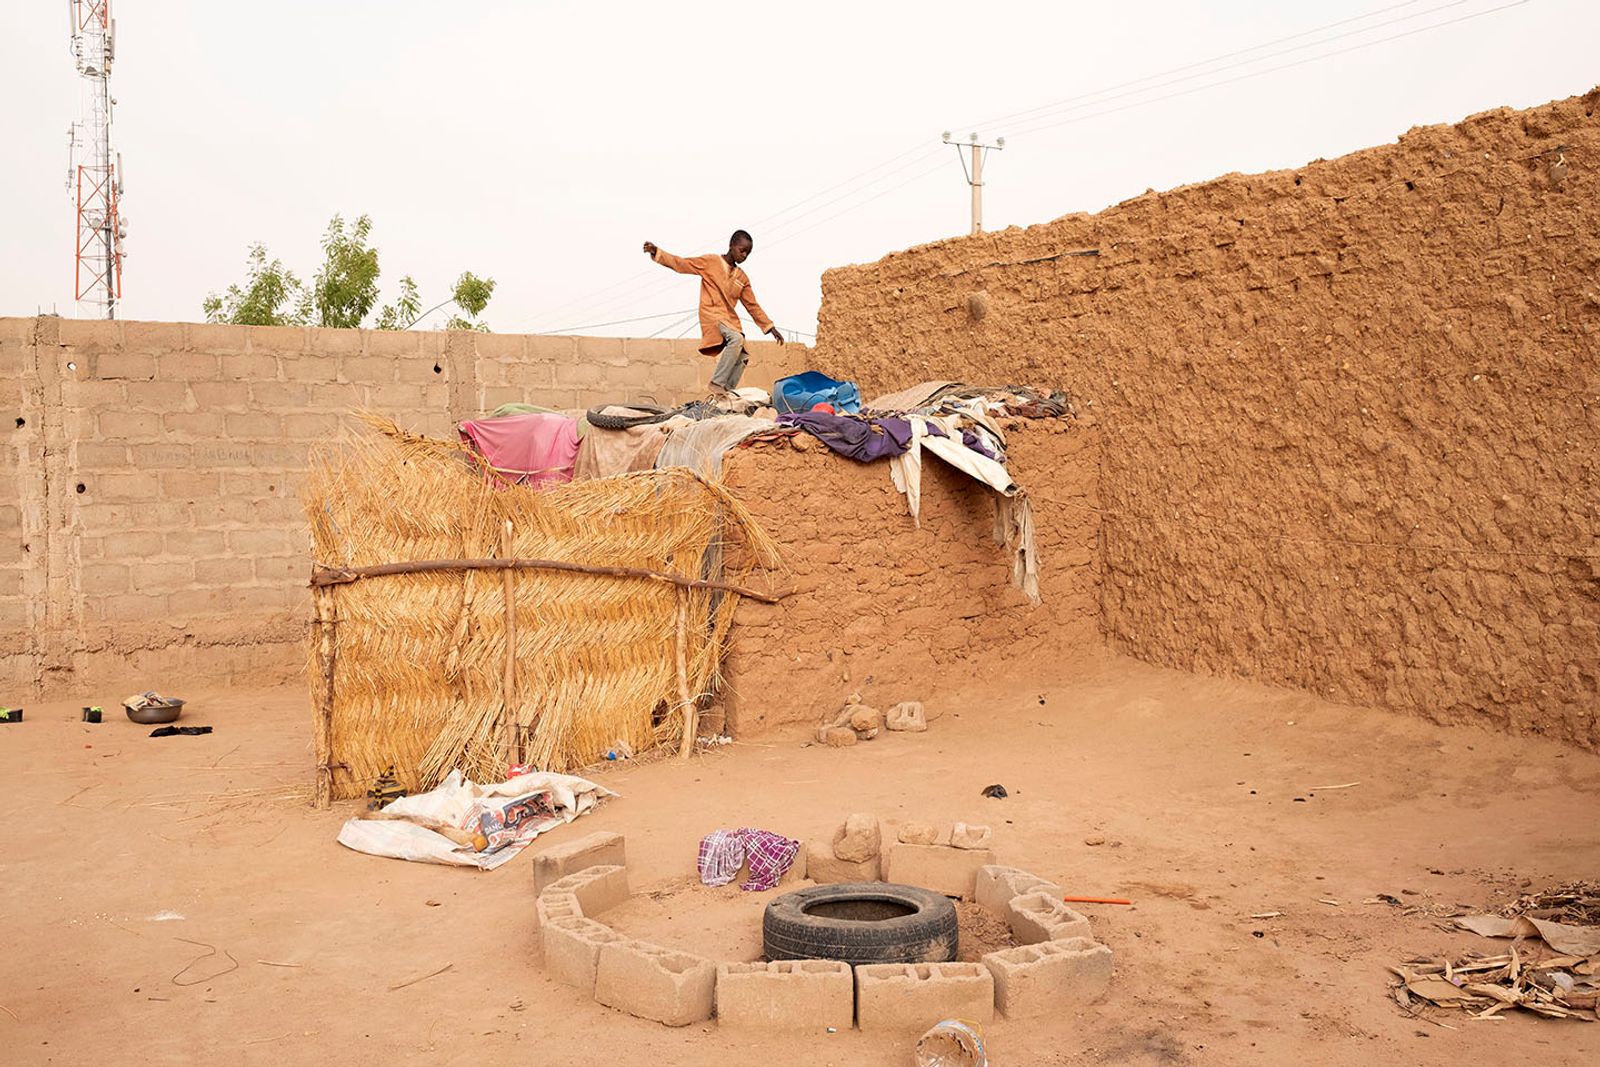 © Francesco Bellina - Image from the Last stop Agadez photography project